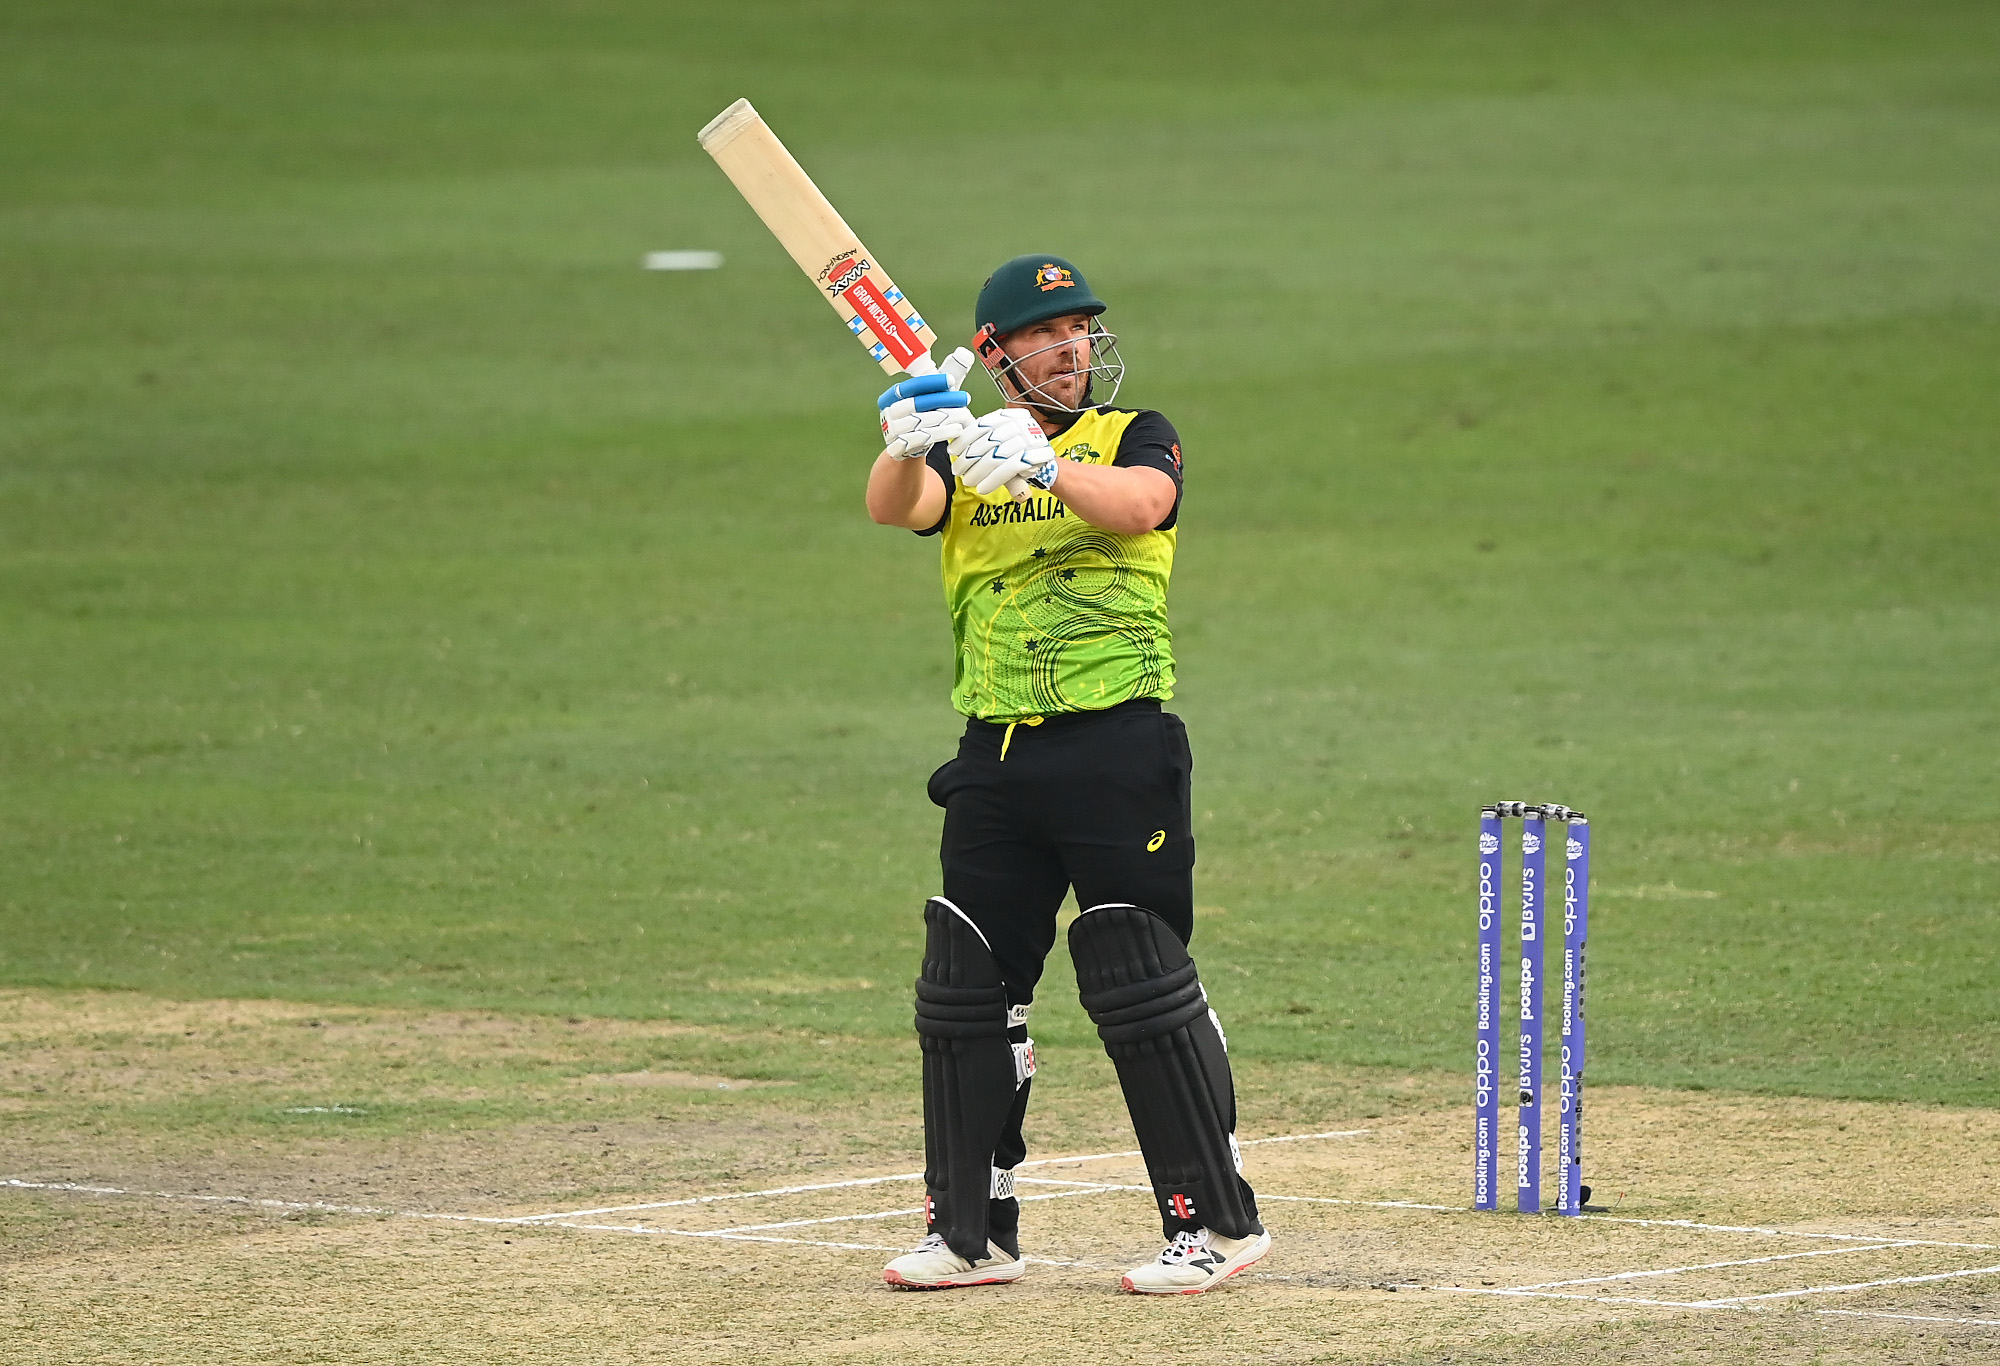 Aaron Finch goes on the attack.